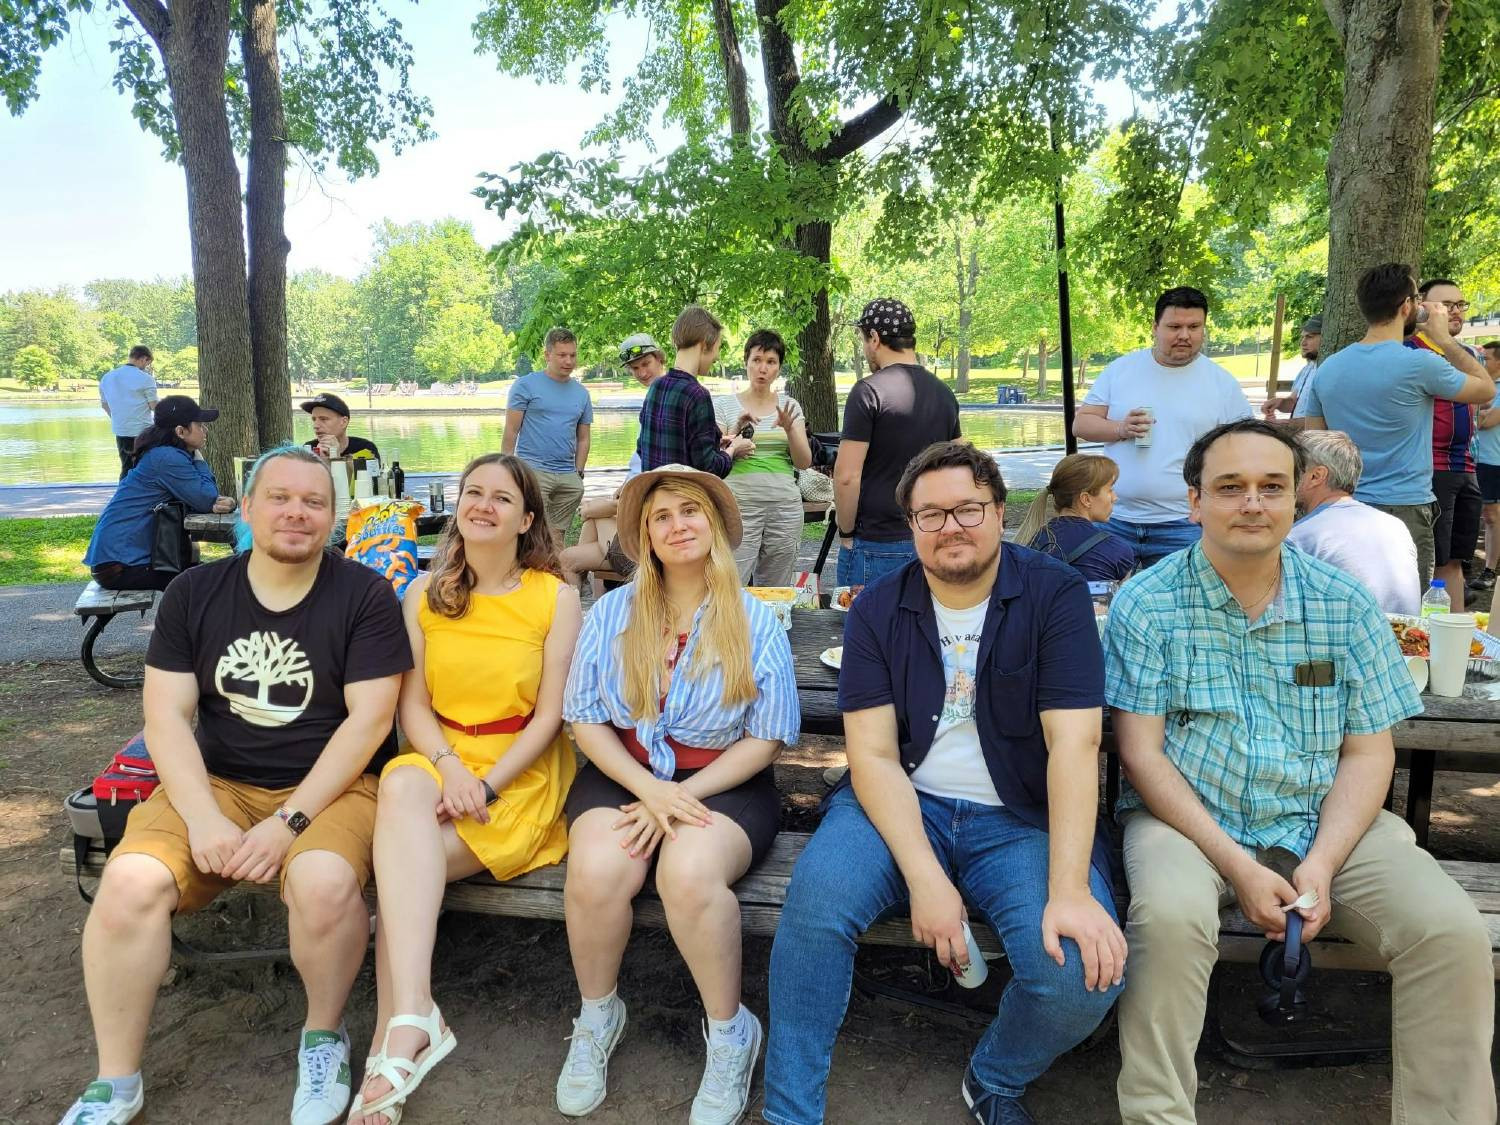 Acumatica's Montreal team hits the great outdoors for a picnic and fun in the sun! 